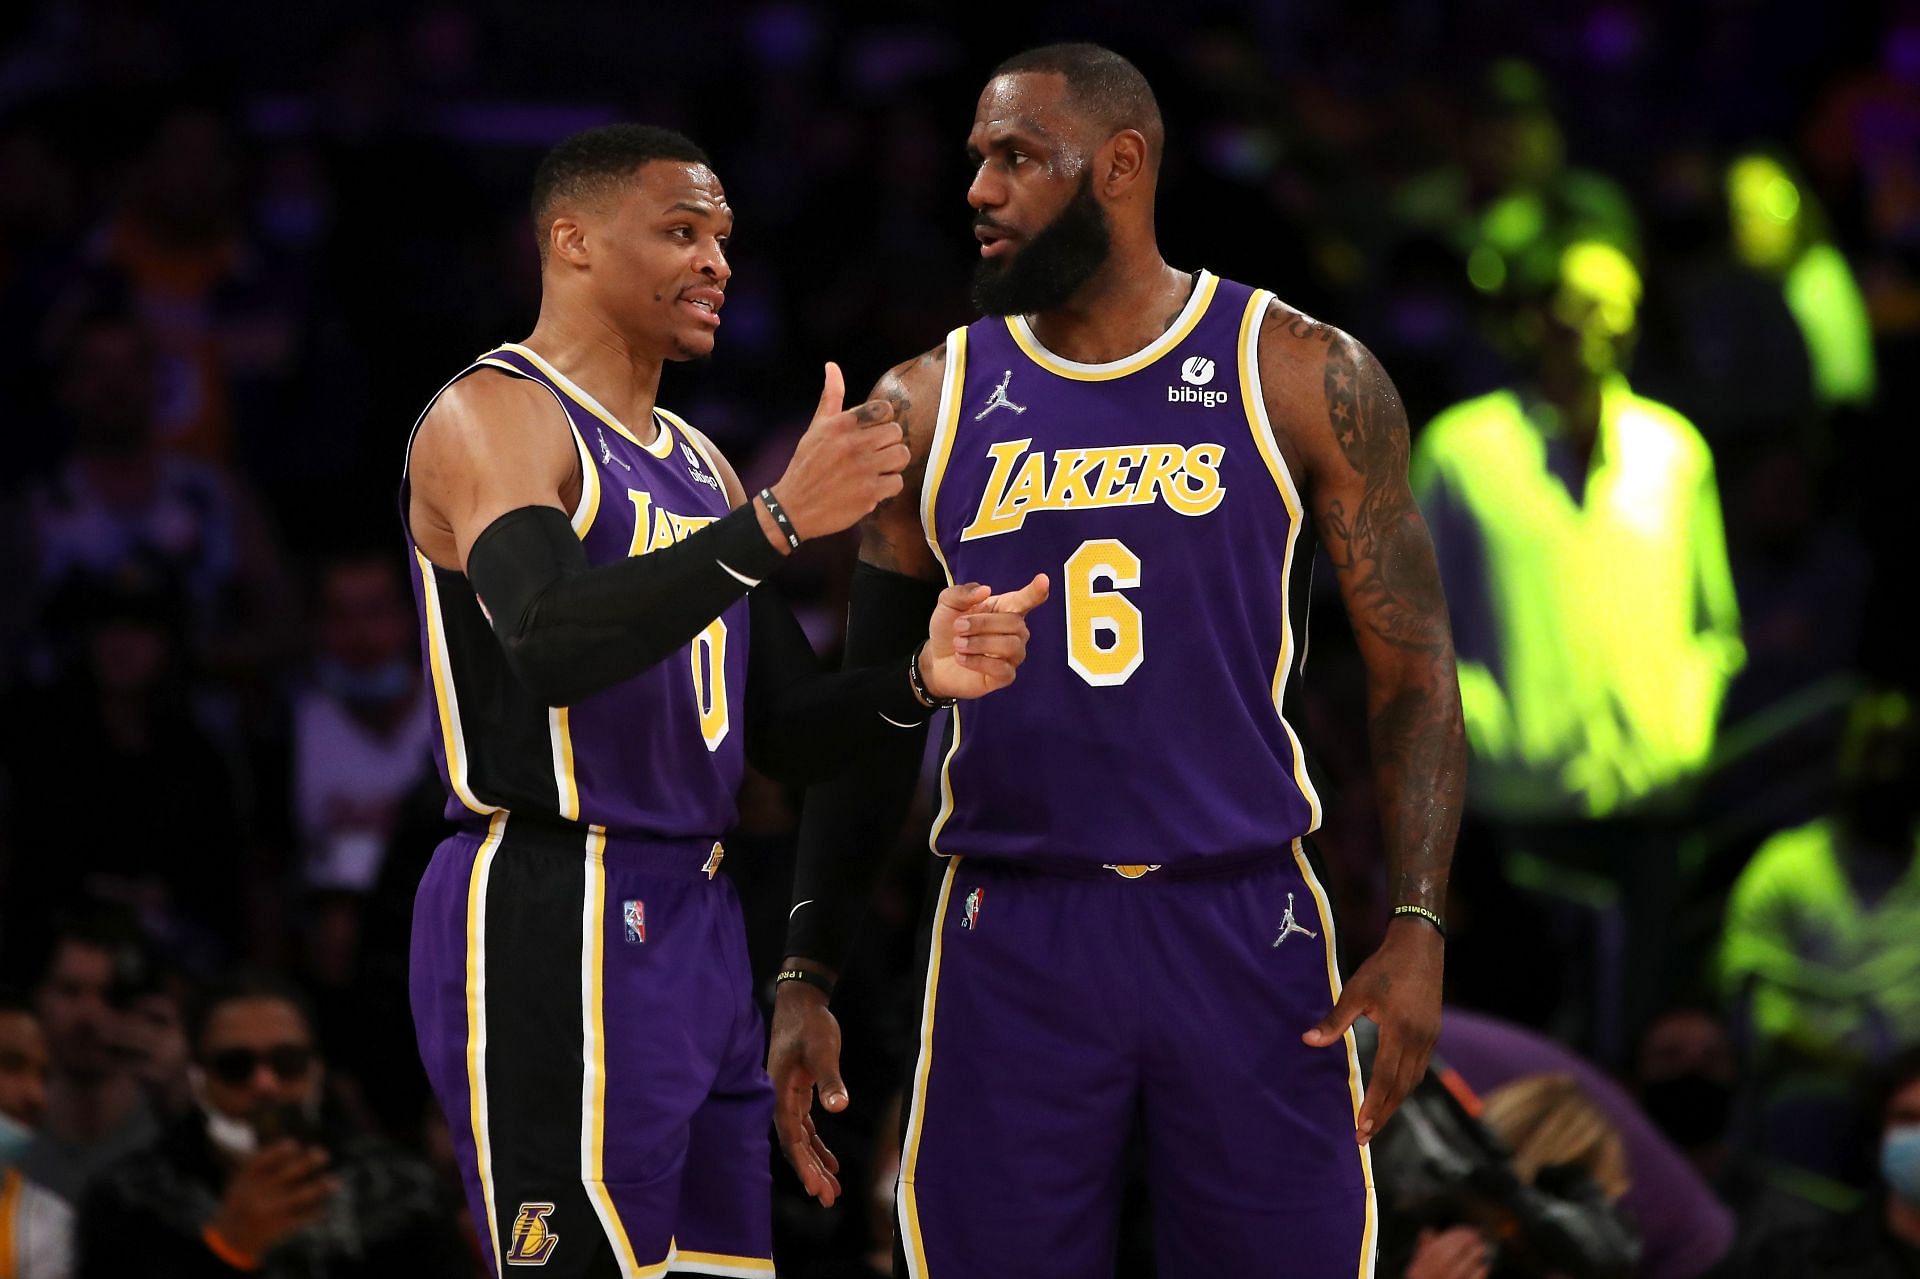 The Lakers would need these two at their best to beat the Golden State Warriors